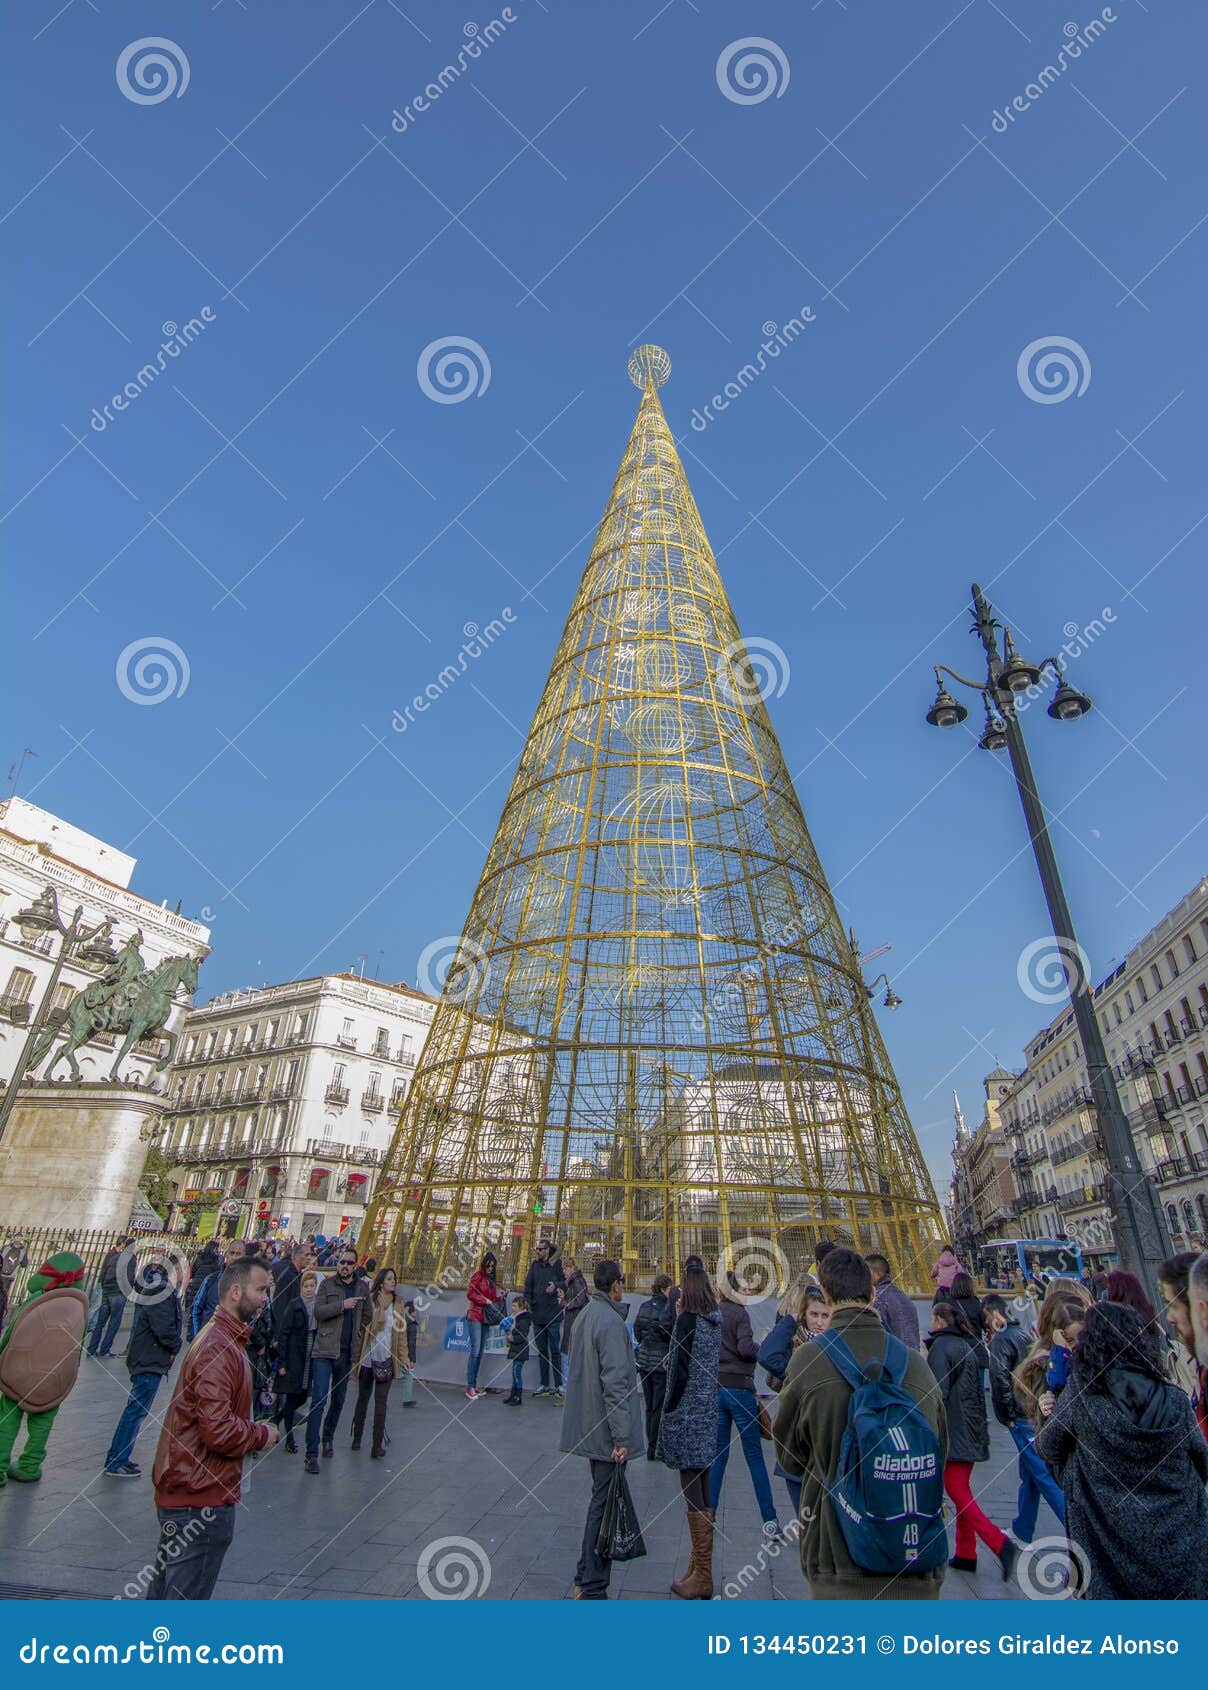 Foto Di Madrid A Natale.Christmas Tree At Puerta Del Sol In Madrid Spain Editorial Photo Image Of Tree Christmas 134450231